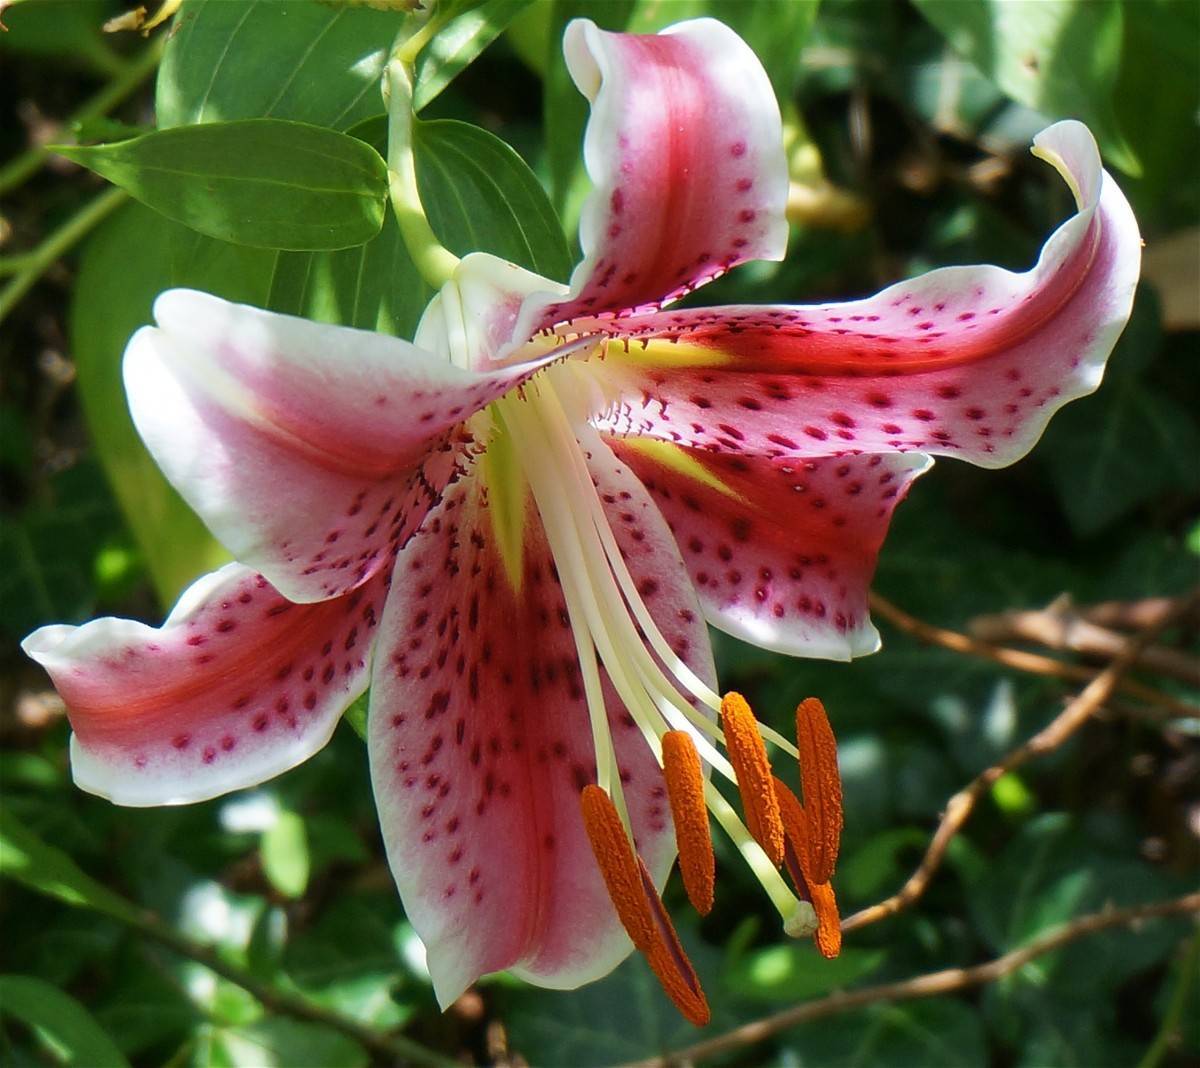 a pink-white flower with light-yellow filaments, orange anthers, light-green stem and green leaves